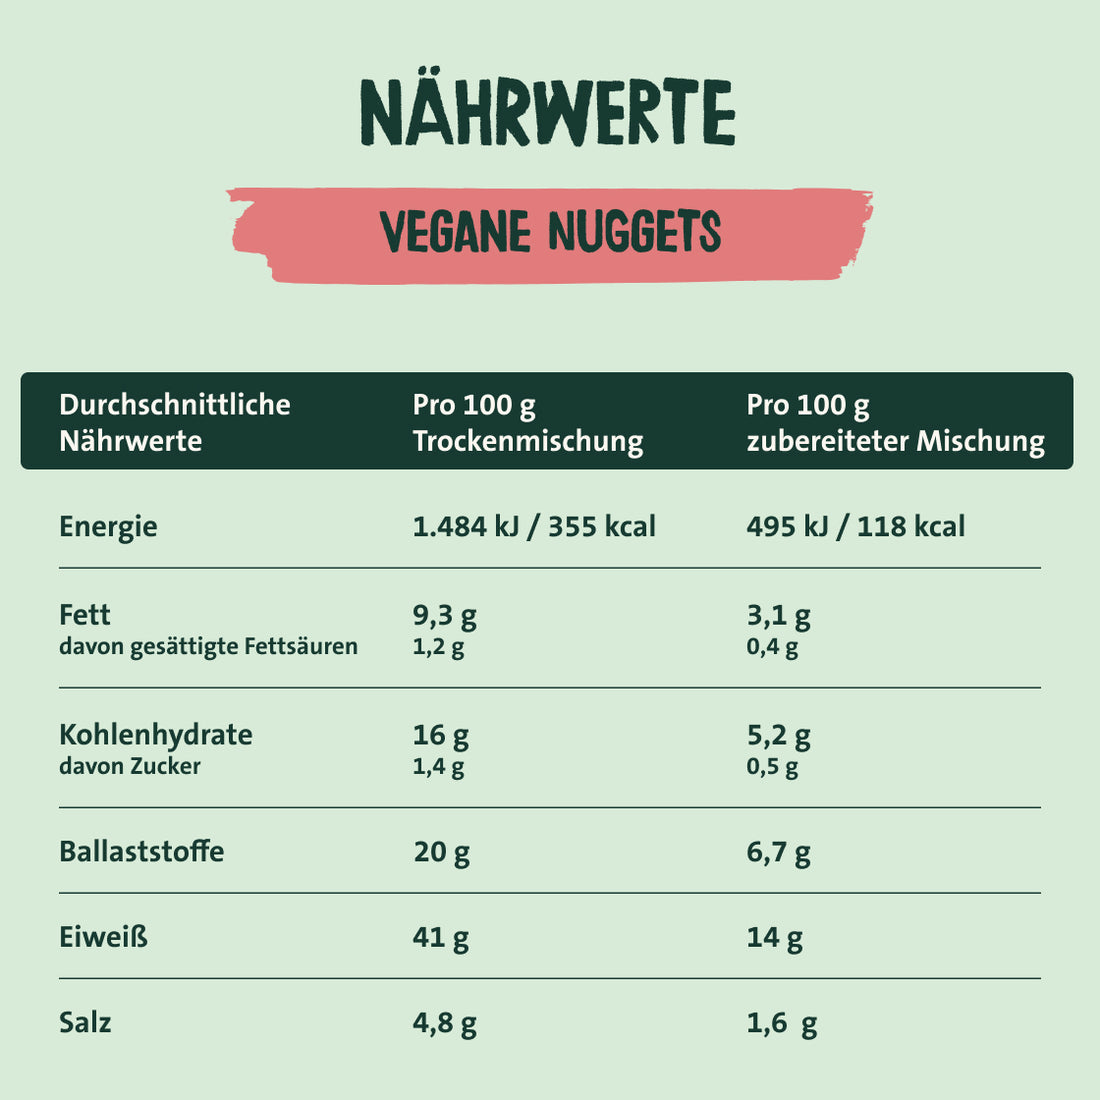 Easy To Mix vegane Nuggets